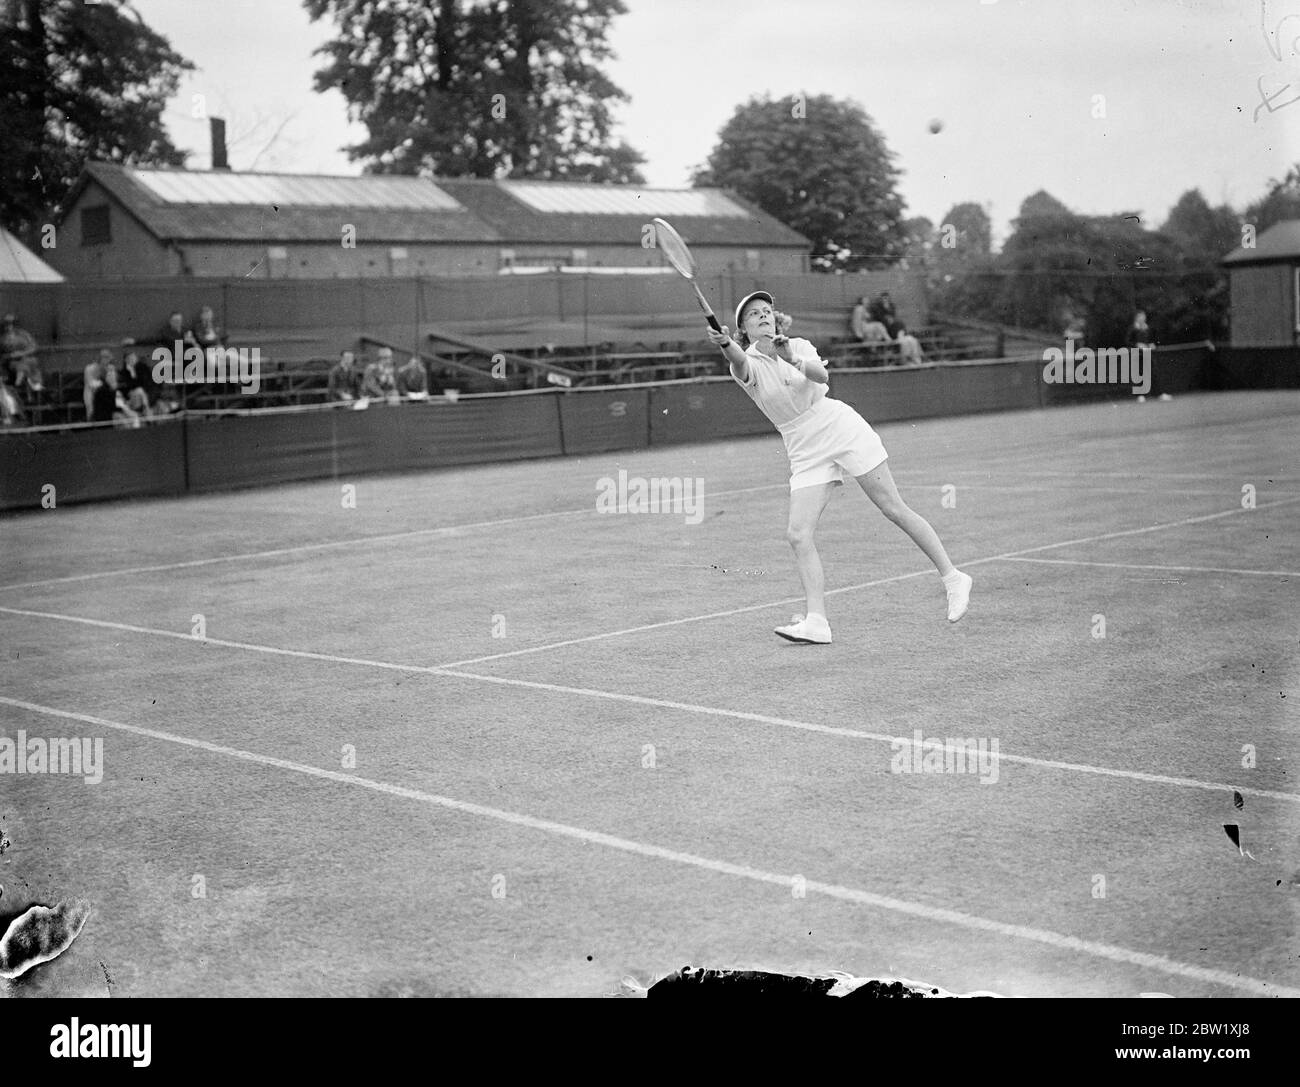 American woman champion fights 1 1/2 hour match in Surbiton Championships. After a hard match lasting over an hour and a half, Miss Alice Marble, the American champion, defeated Miss Thompson in the women's singles of the Surrey lawn tennis Championships at Surbiton, Surrey. Photo shows, Miss Alice Marble leaving for a high shot during her match against Miss Thompson. 20 May 1937 Stock Photo